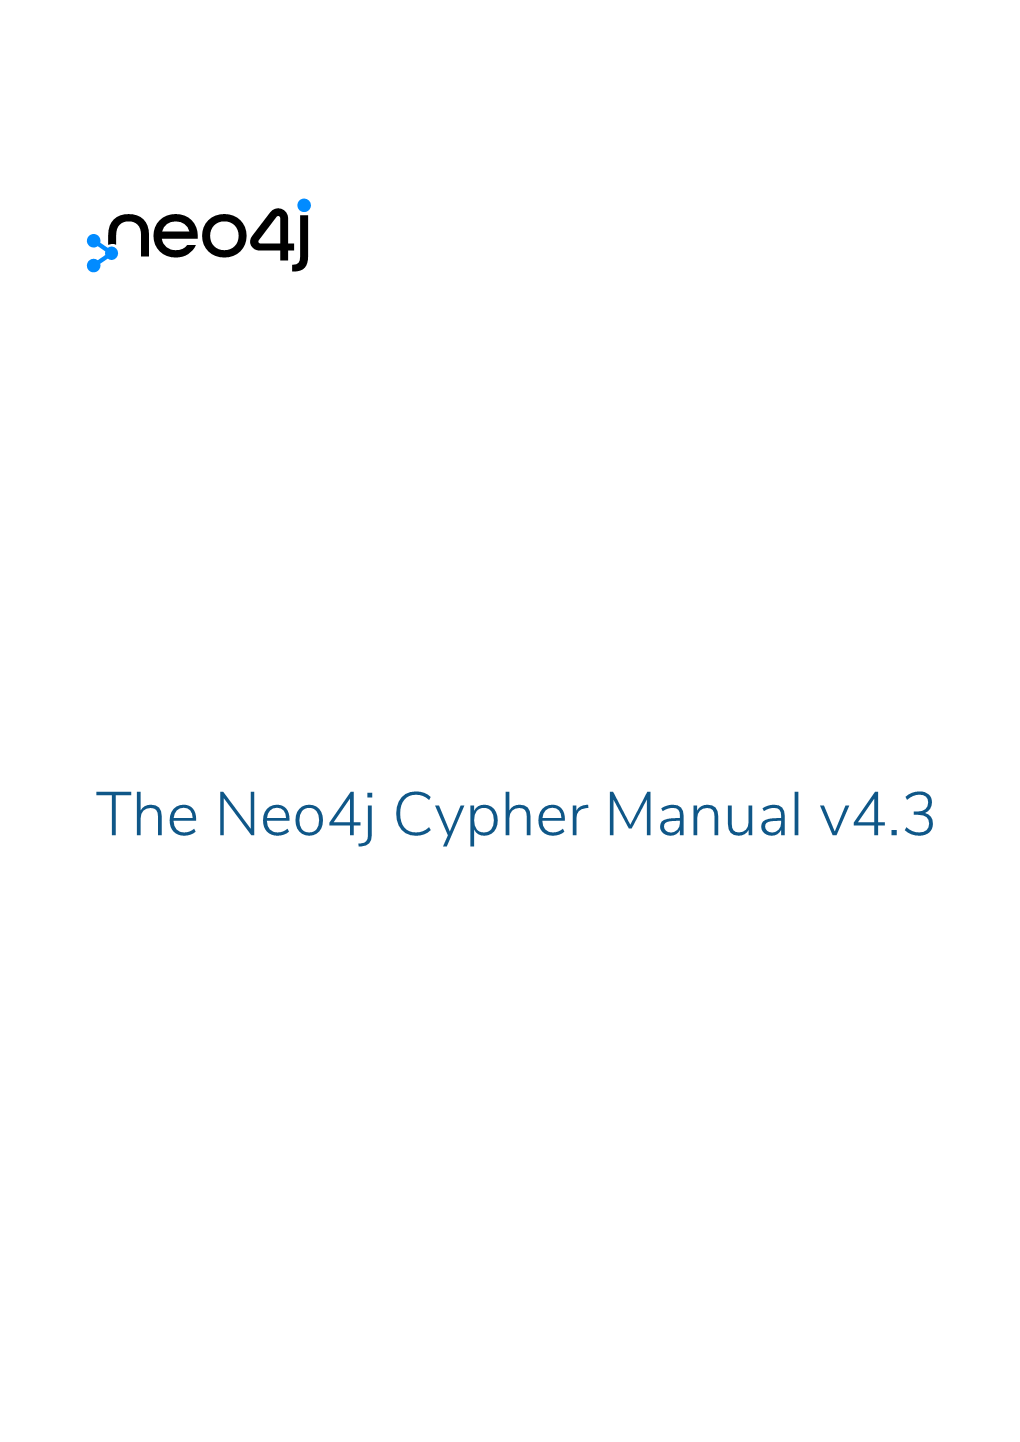 The Neo4j Cypher Manual V4.3 Table of Contents